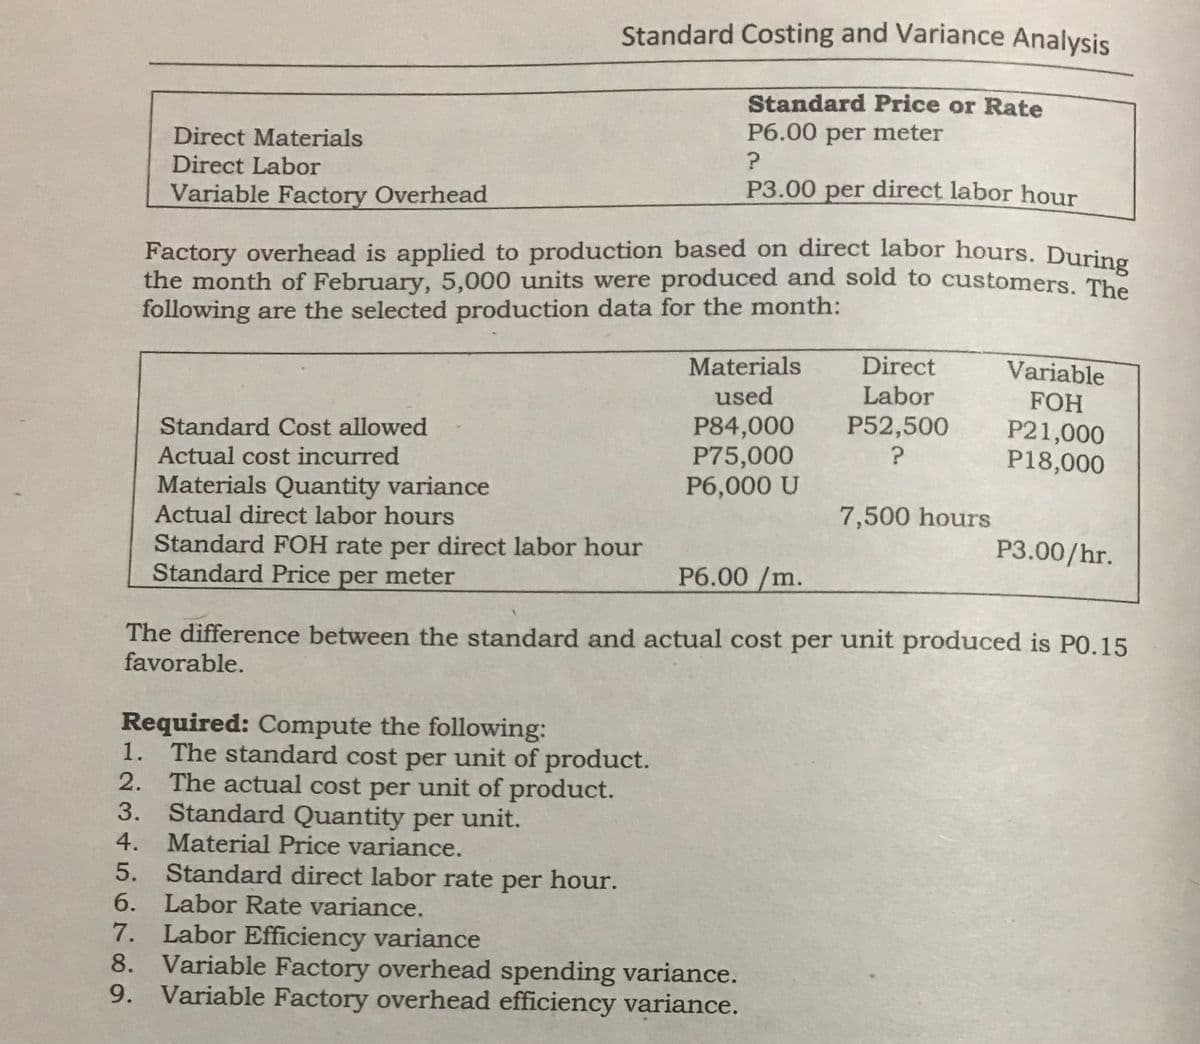 Standard Costing and Variance Analysis
Standard Price or Rate
P6.00 per meter
Direct Materials
Direct Labor
Variable Factory Overhead
P3.00 direct labor hour
per
Factory overhead is applied to production based on direct labor hours. During
the month of February, 5,000 units were produced and sold to customers. Th
following are the selected production data for the month:
Materials
Direct
Variable
used
Labor
FOH
P52,500
Standard Cost allowed
Actual cost incurred
P84,000
P75,000
P6,000 U
P21,000
P18,000
?
Materials Quantity variance
Actual direct labor hours
7,500 hours
Standard FOH rate per direct labor hour
Standard Price per meter
P3.00/hr.
P6.00 /m.
The difference between the standard and actual cost per unit produced is P0.15
favorable.
Required: Compute the following:
1. The standard cost per unit of product.
2. The actual cost per unit of product.
Standard Quantity per unit.
4. Material Price variance.
3.
5.
6. Labor Rate variance.
Standard direct labor rate per hour.
7. Labor Efficiency variance
8. Variable Factory overhead spending variance.
9. Variable Factory overhead efficiency variance.
